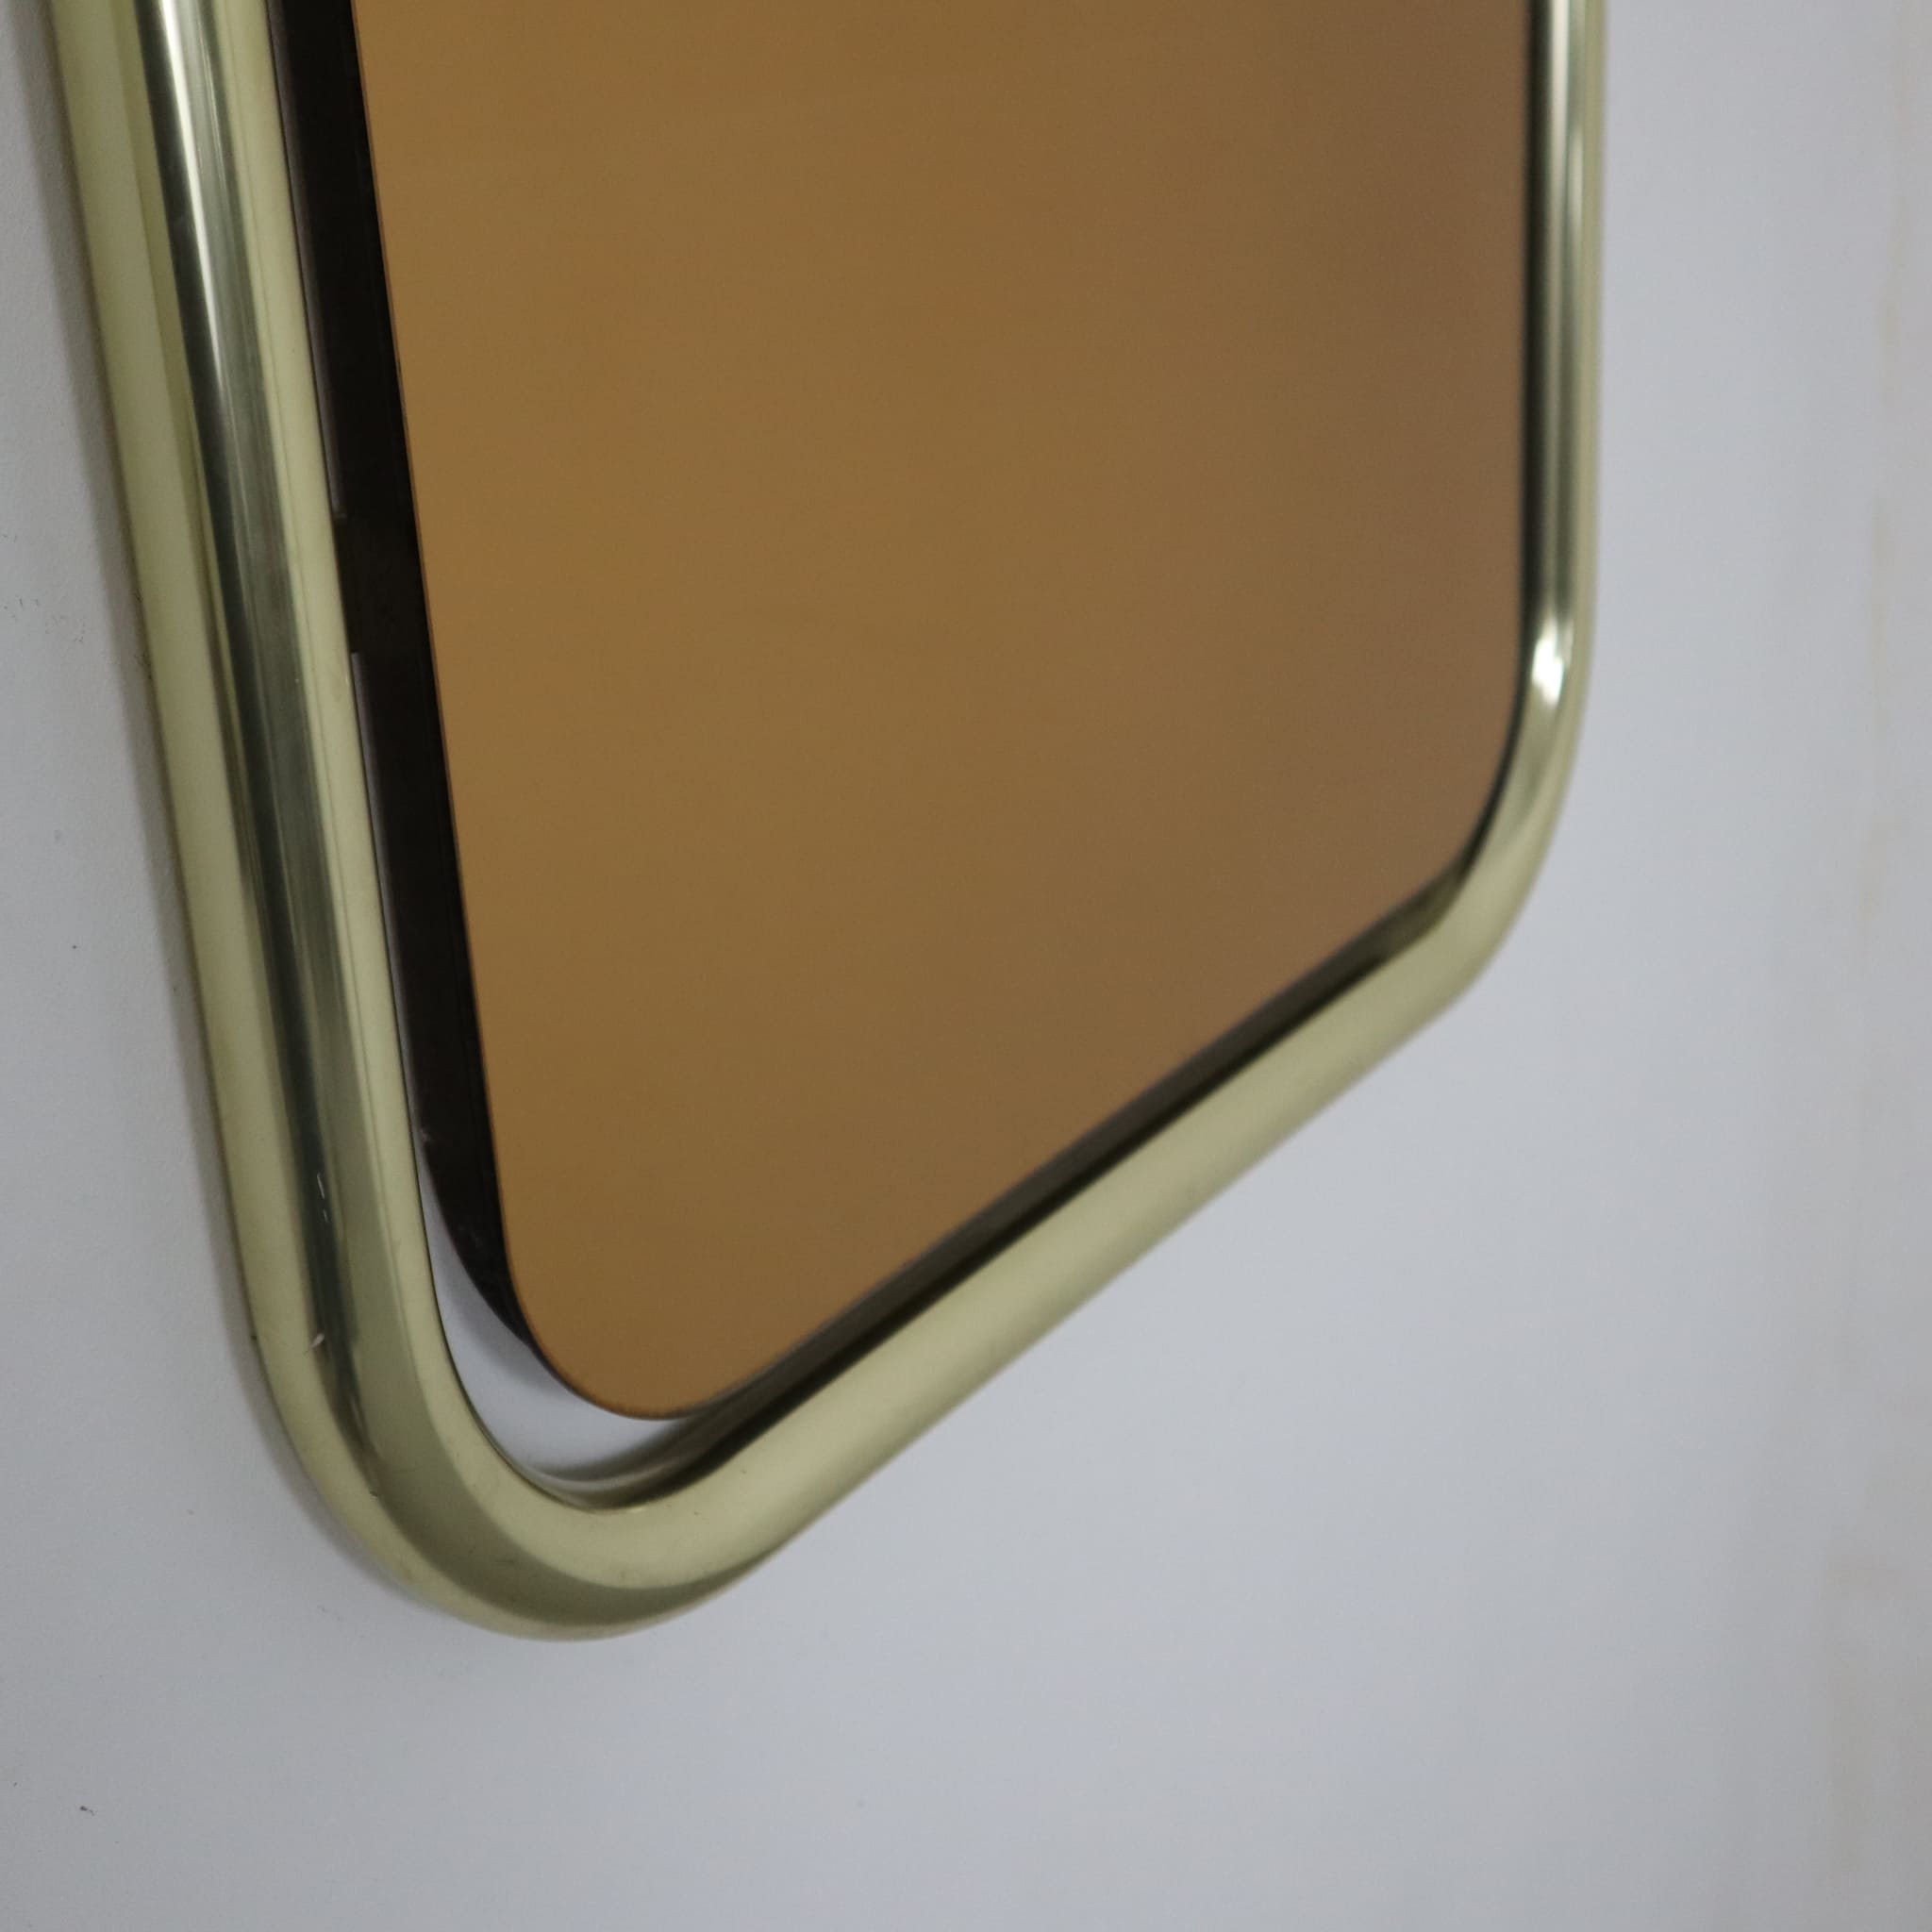 visionidepoca-modern-mirror-70s-frame-in-brassed-aluminium-and-bronzed-mirror-vintage-made-in-italy-detail-of-mirror-frame